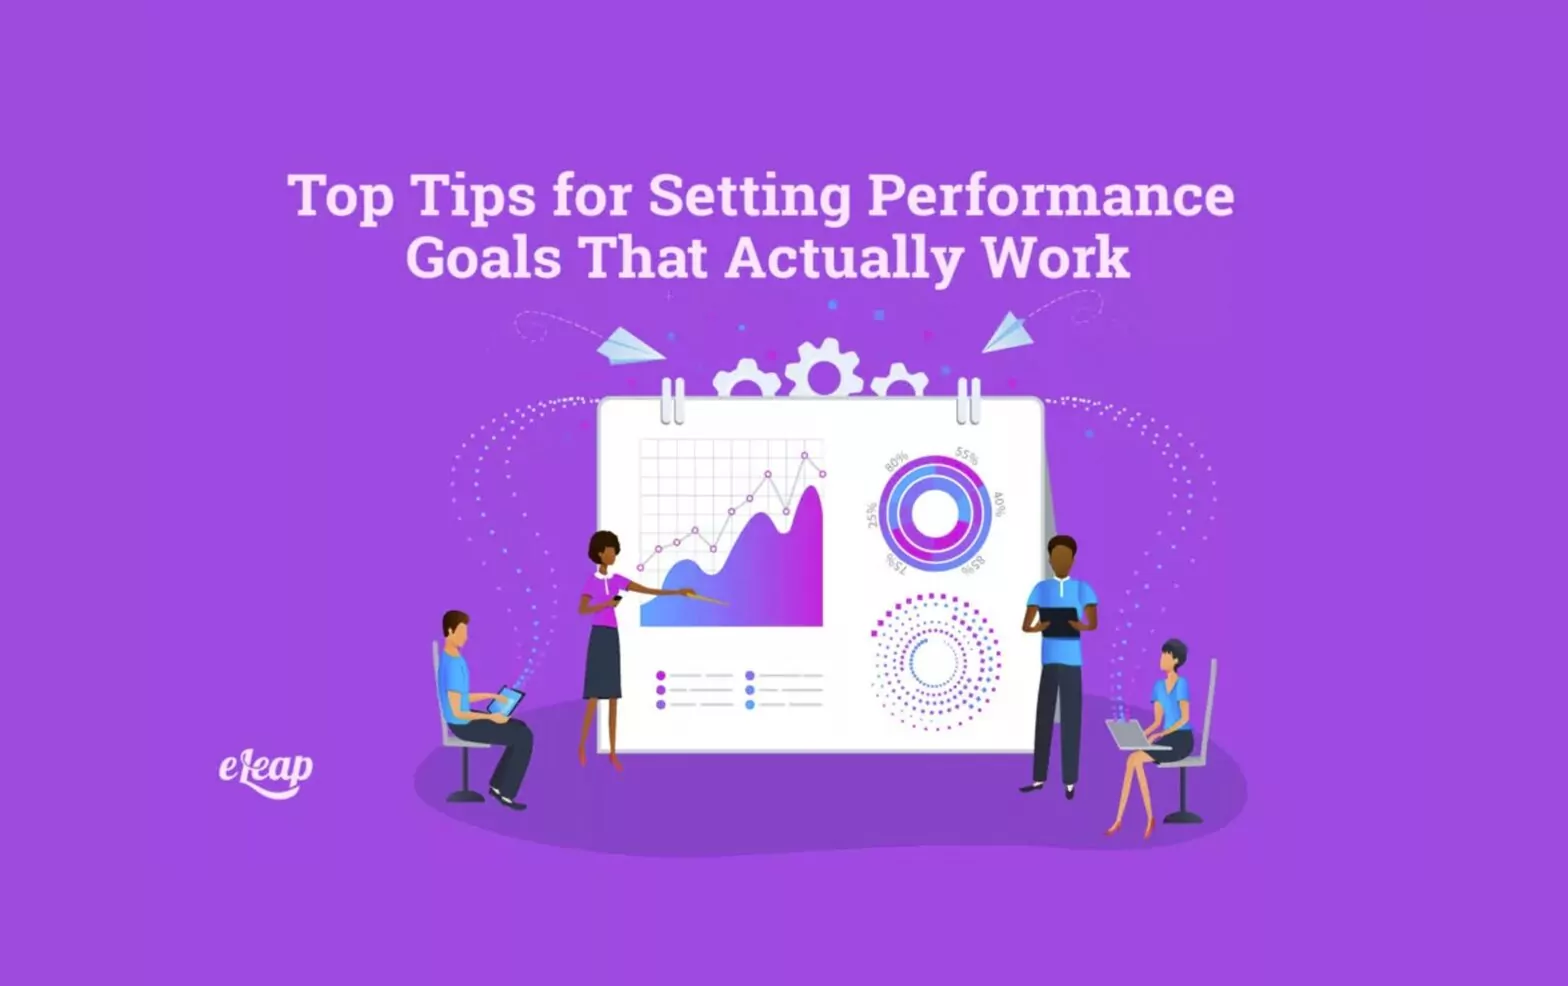 Top Tips for Setting Performance Goals That Actually Work